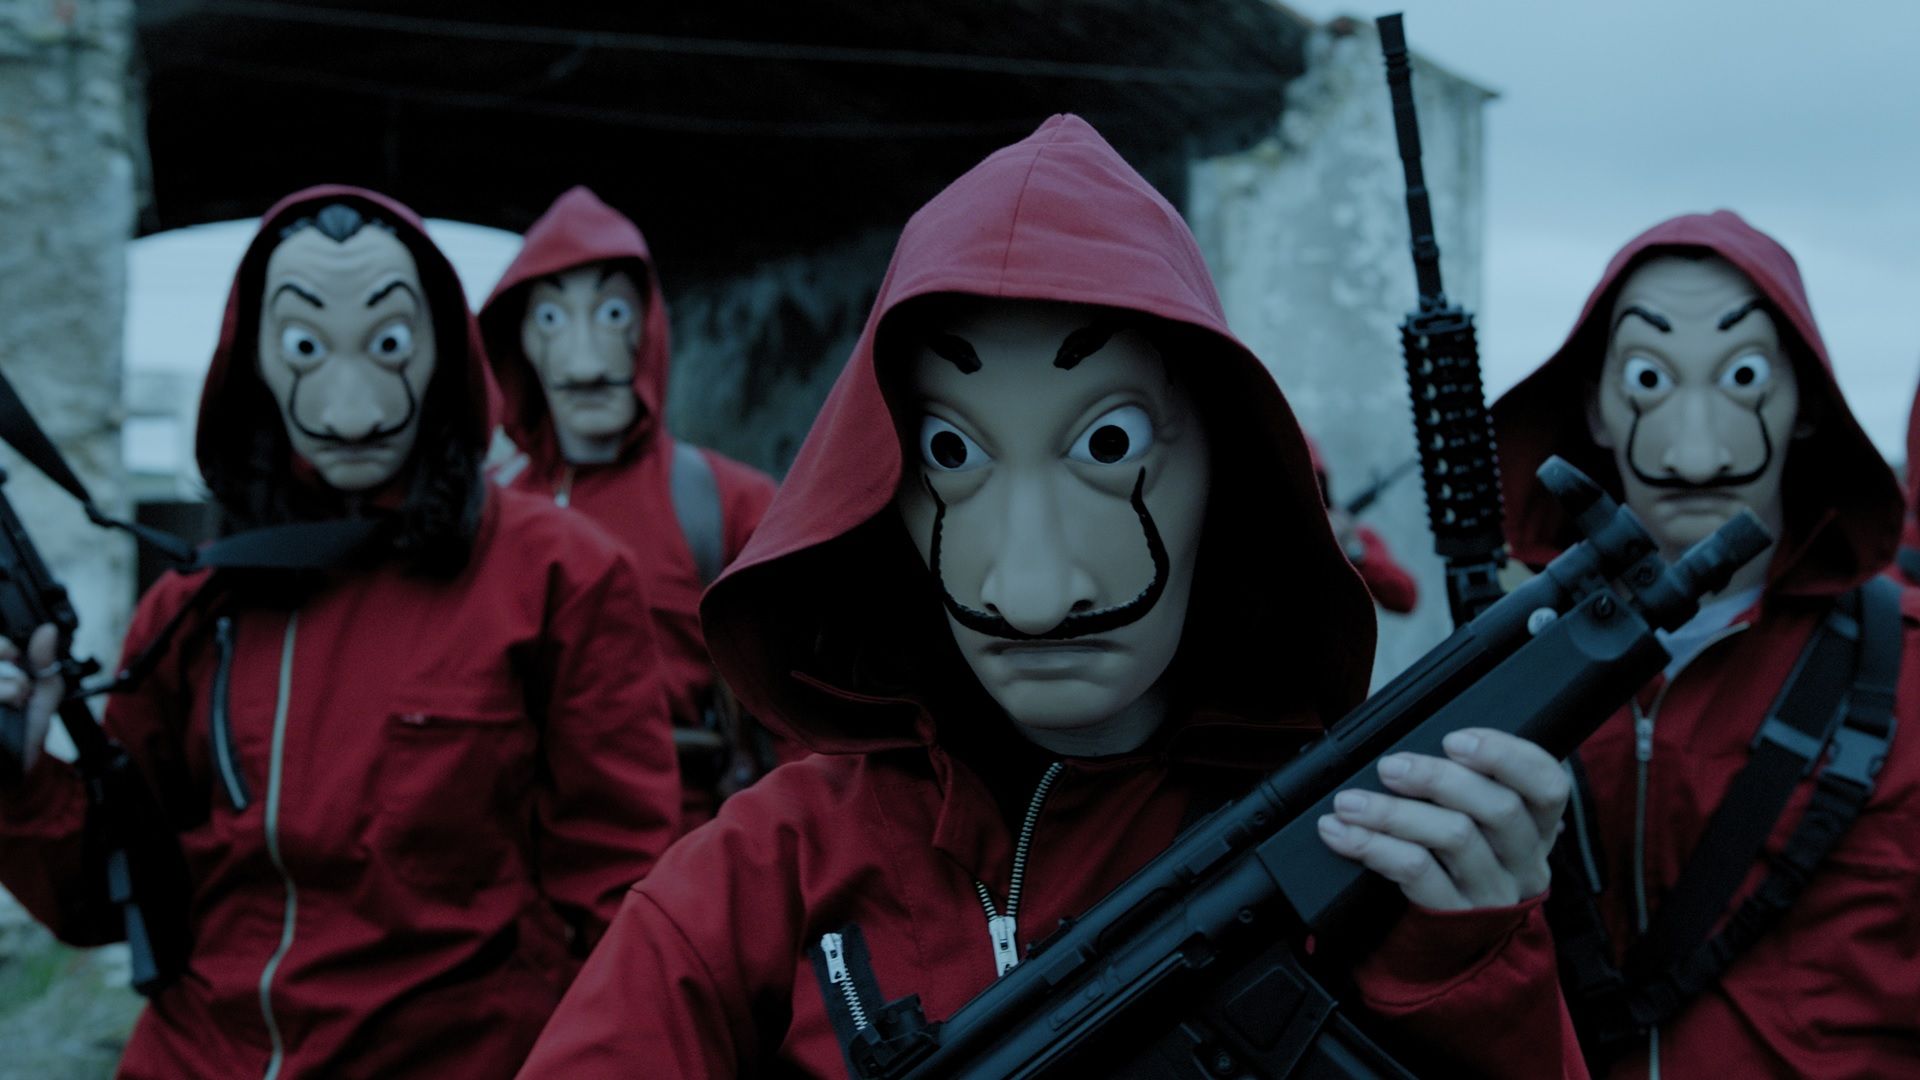 The crew wearing the signature Dali masks in Money Heist.